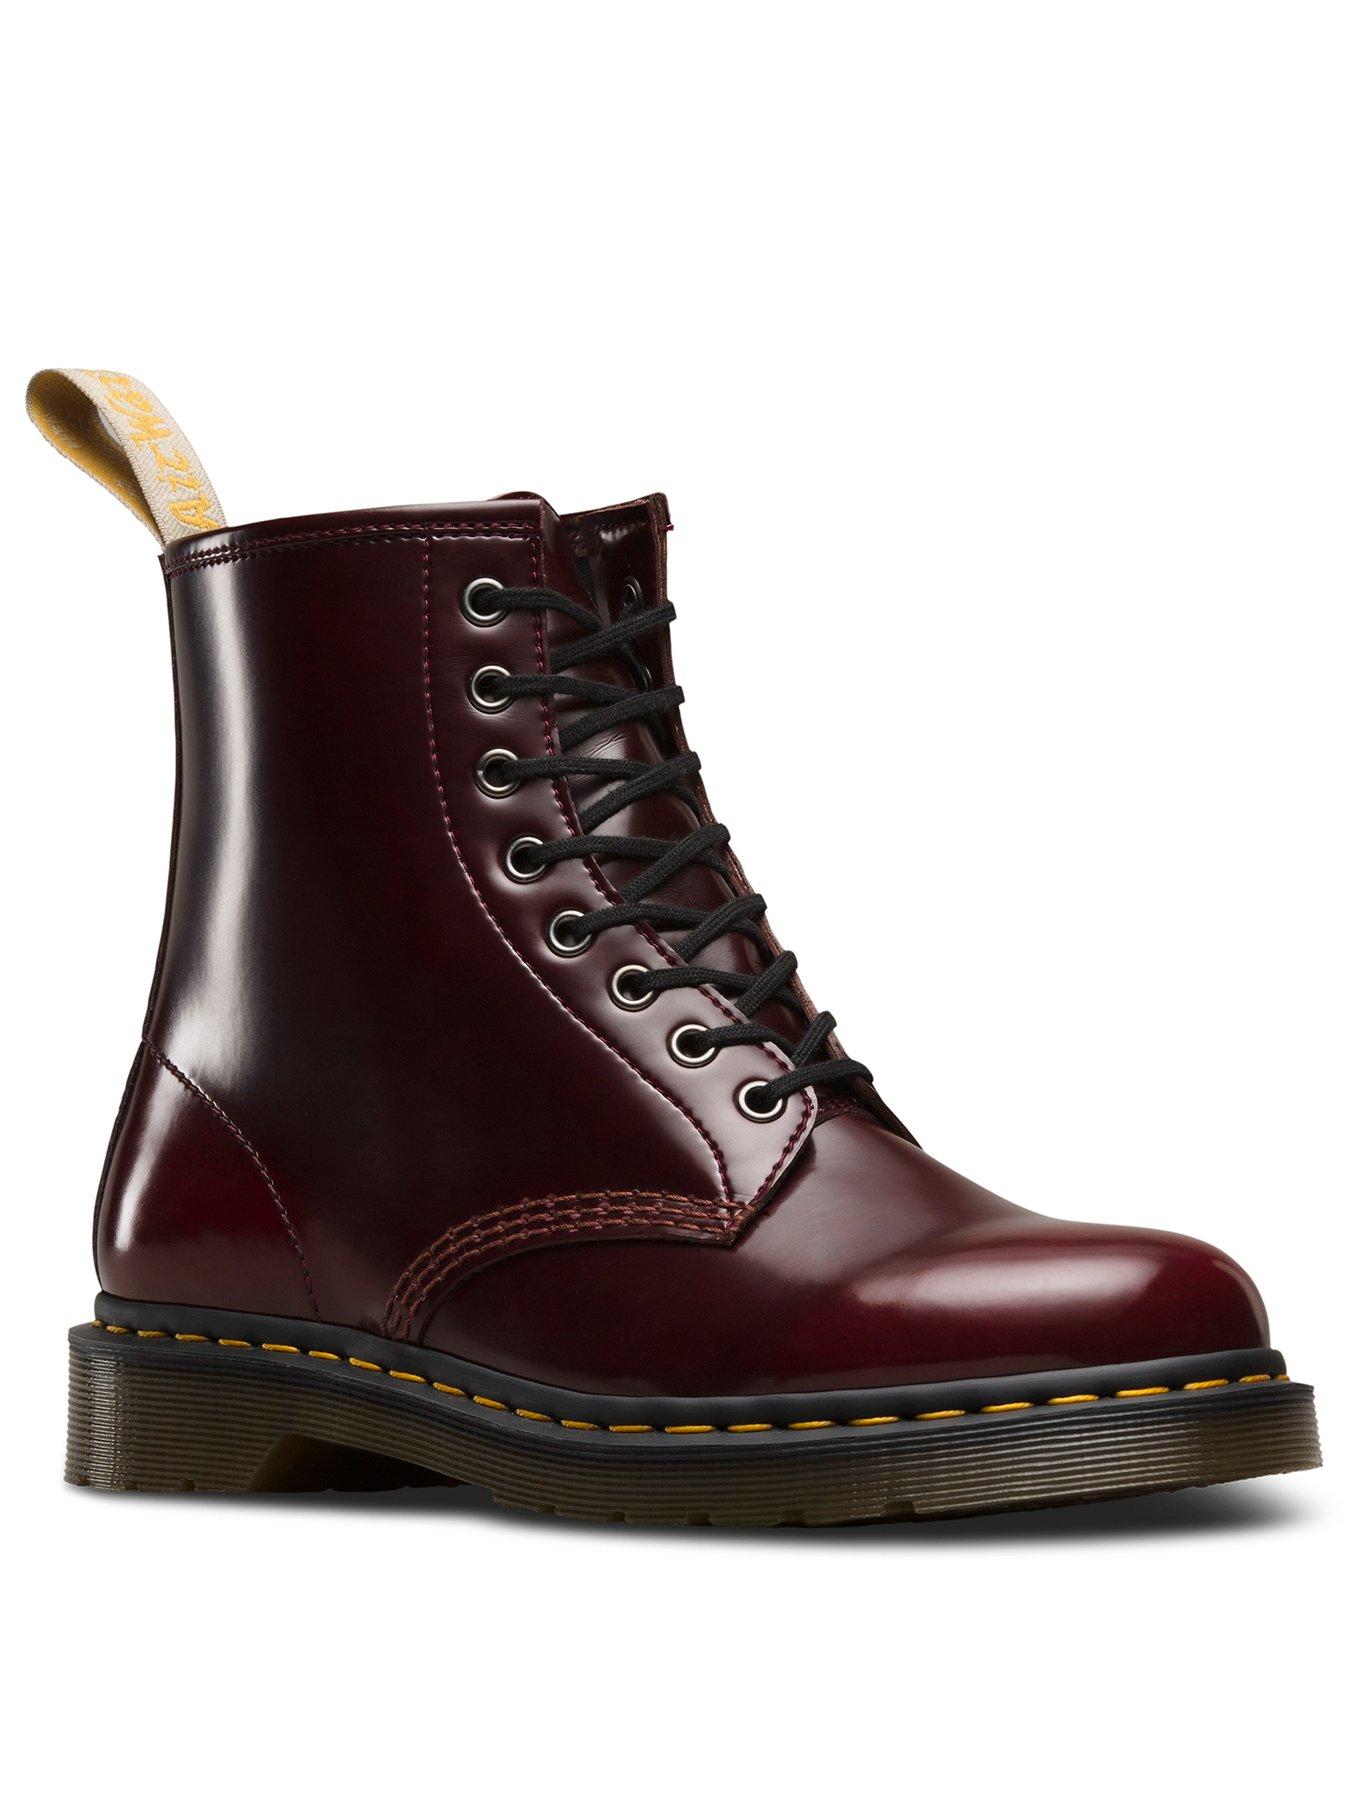 Dr Martens Clearance | DMs Sale | Very 